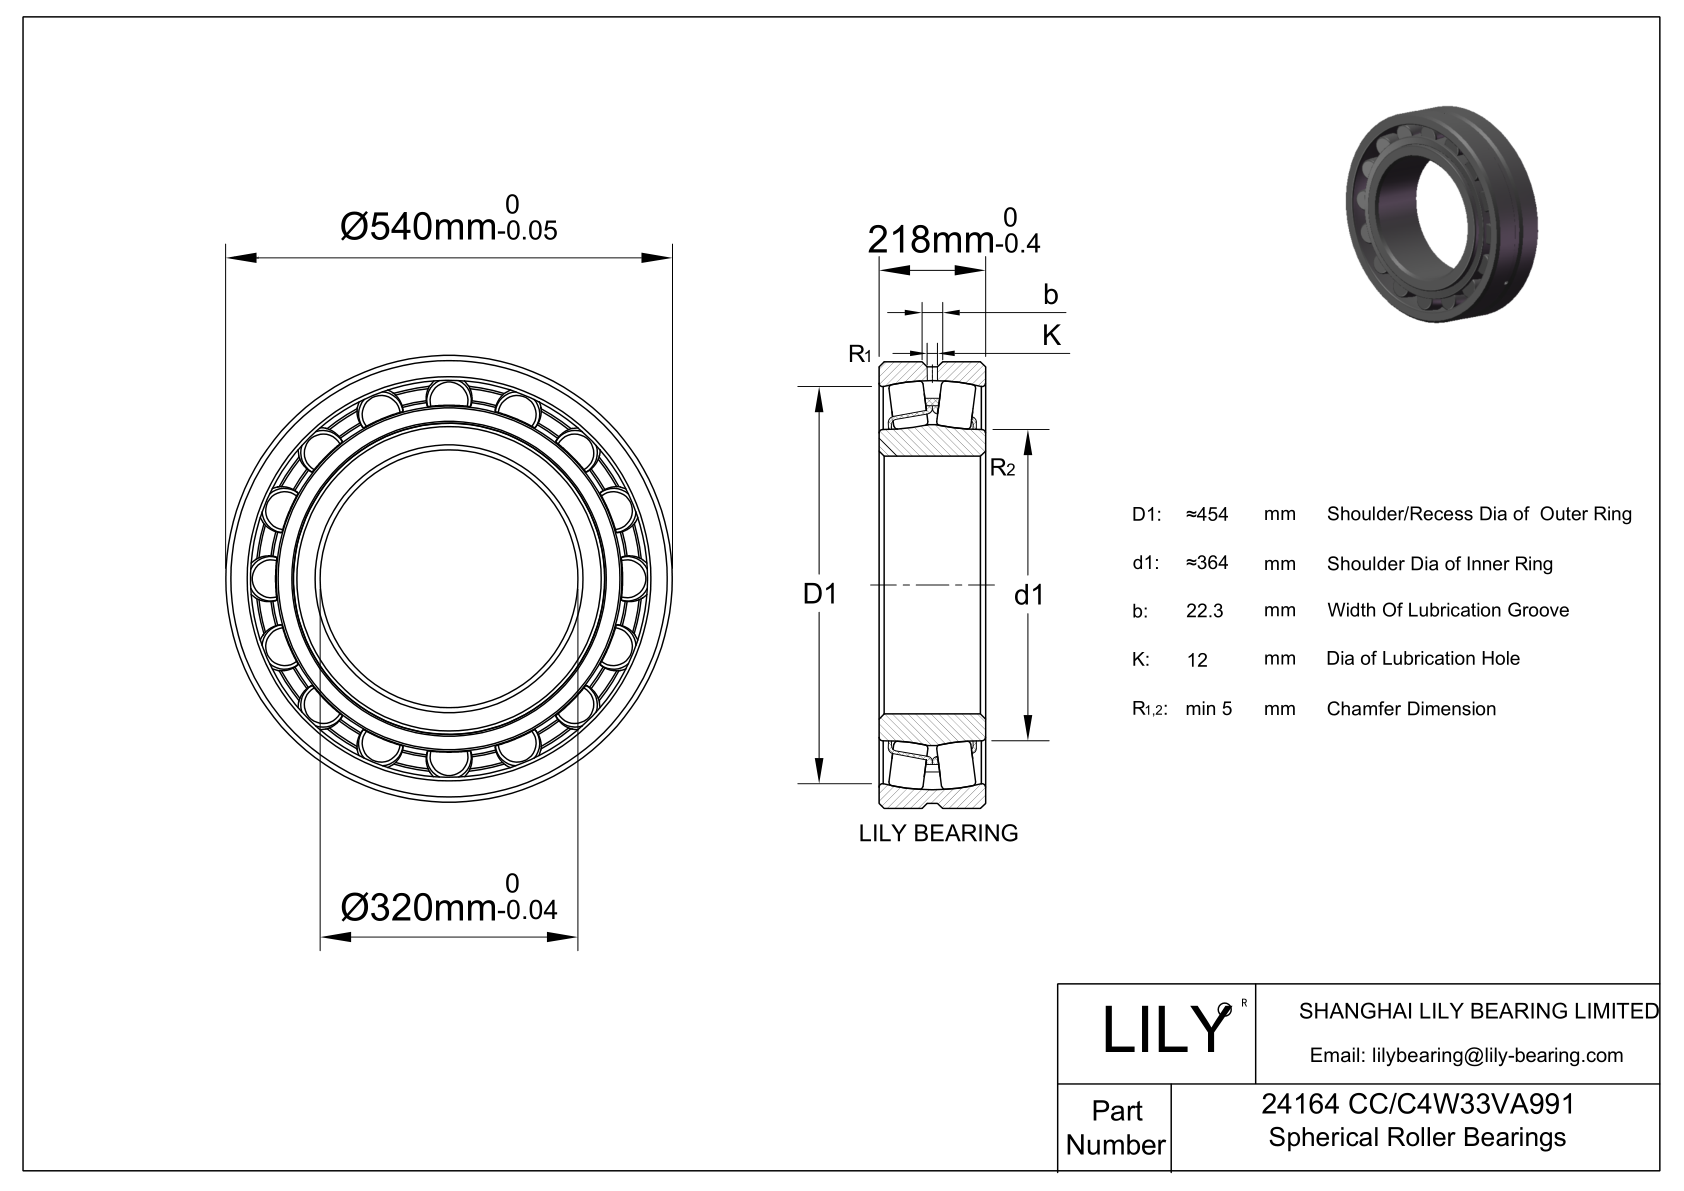 24164 CC/C4W33VA991 Double Row Spherical Roller Bearing cad drawing